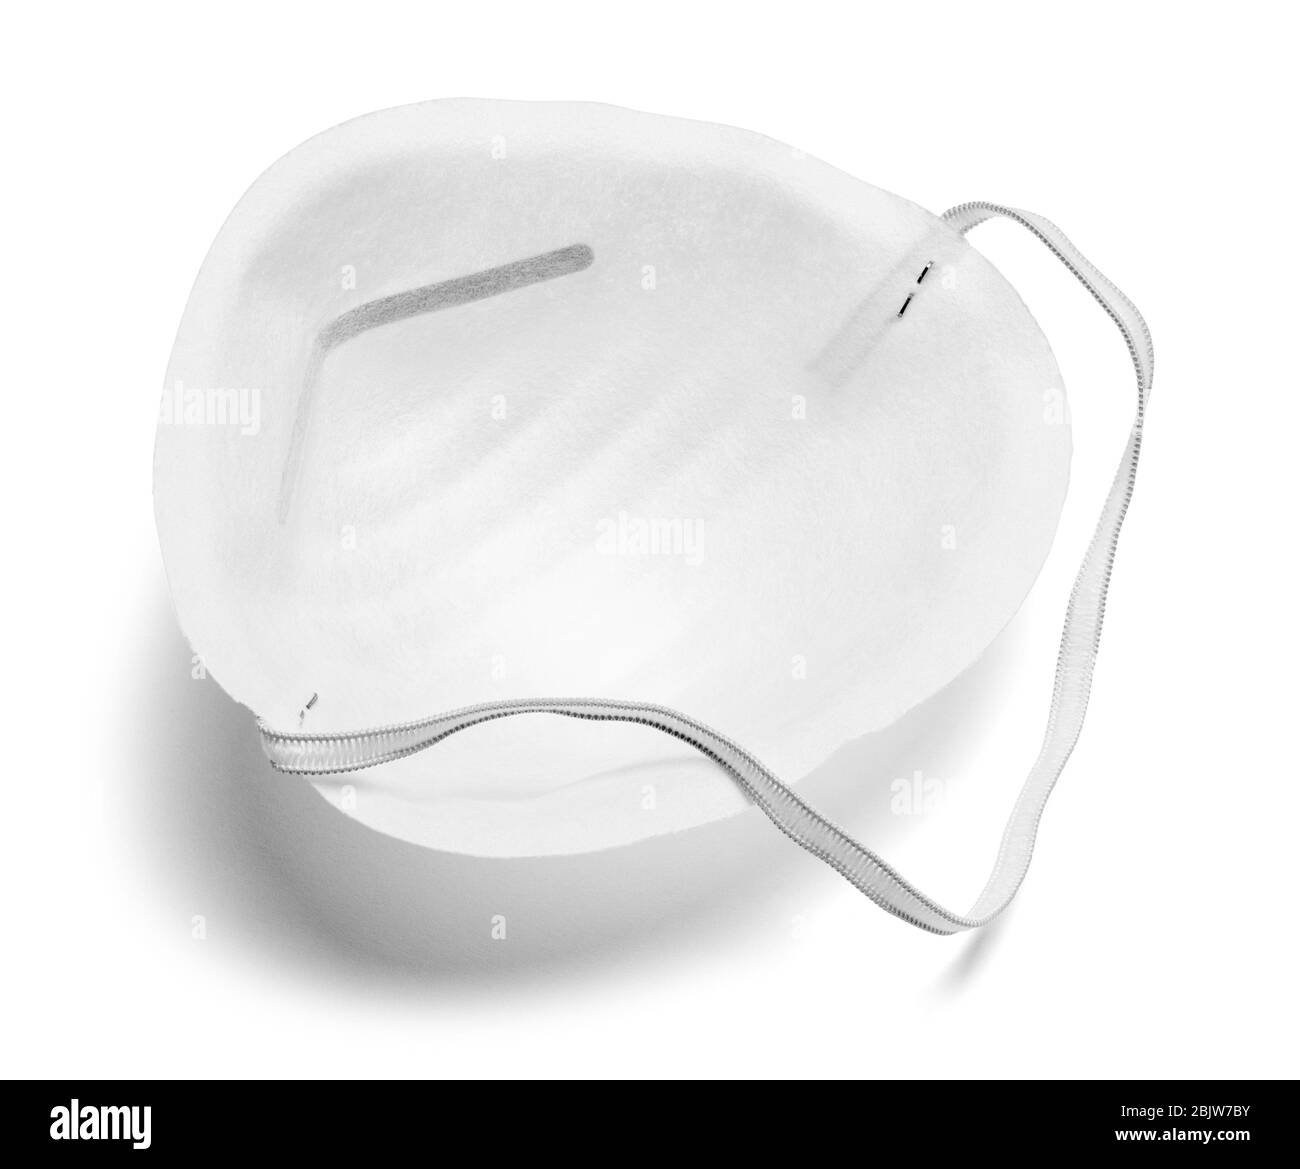 Worn Resting Surgical Medical Mask Cut Out. Stock Photo